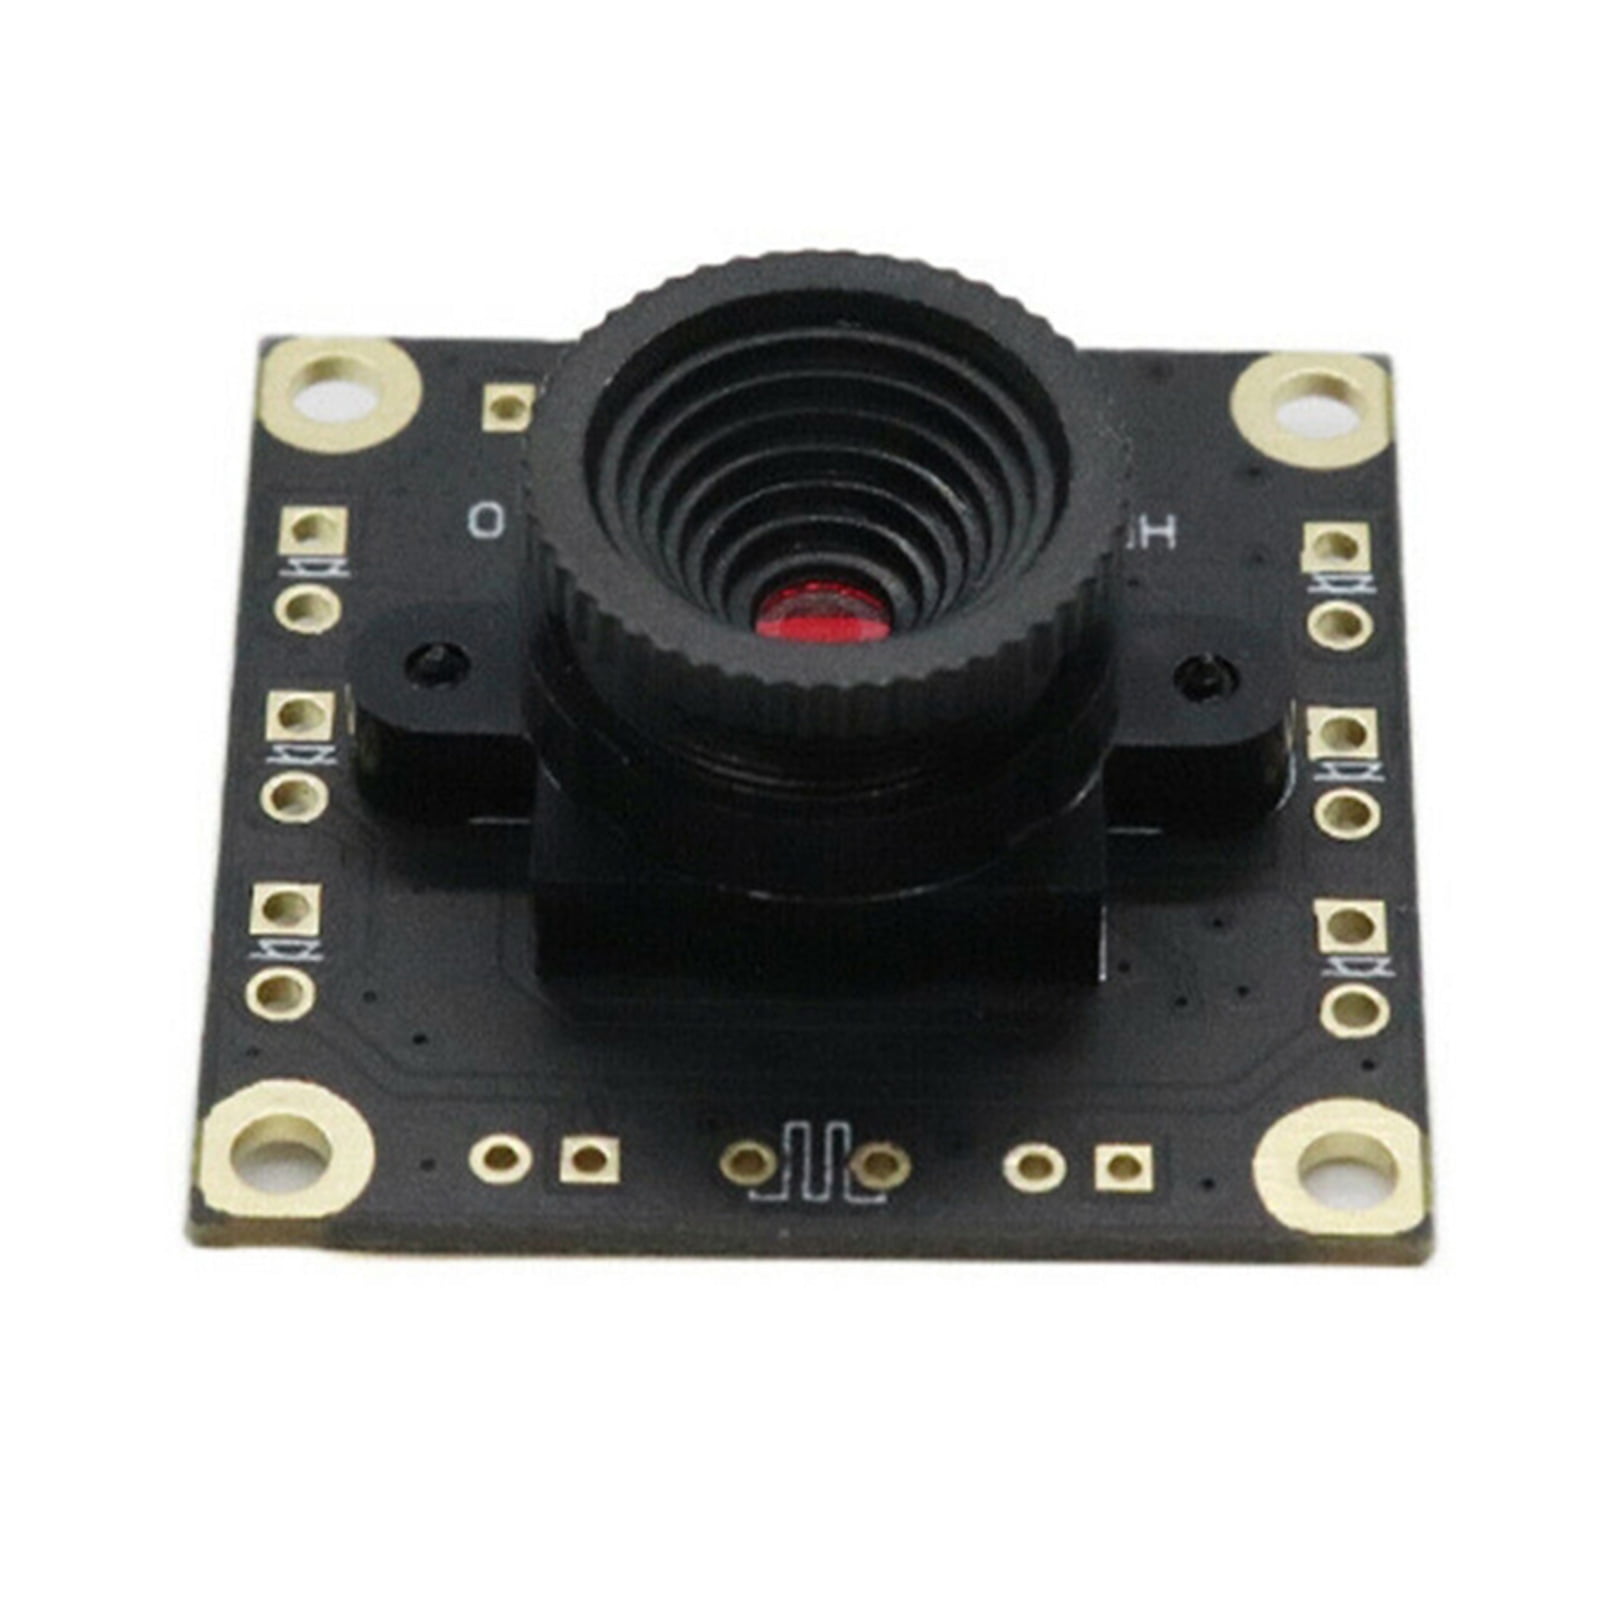 ZPAQI USB Camera Module OV9726 CMOS 1MP 42/70 Degree Lens USB IP Camera  Module For Window Android Linux System 1M Pixels